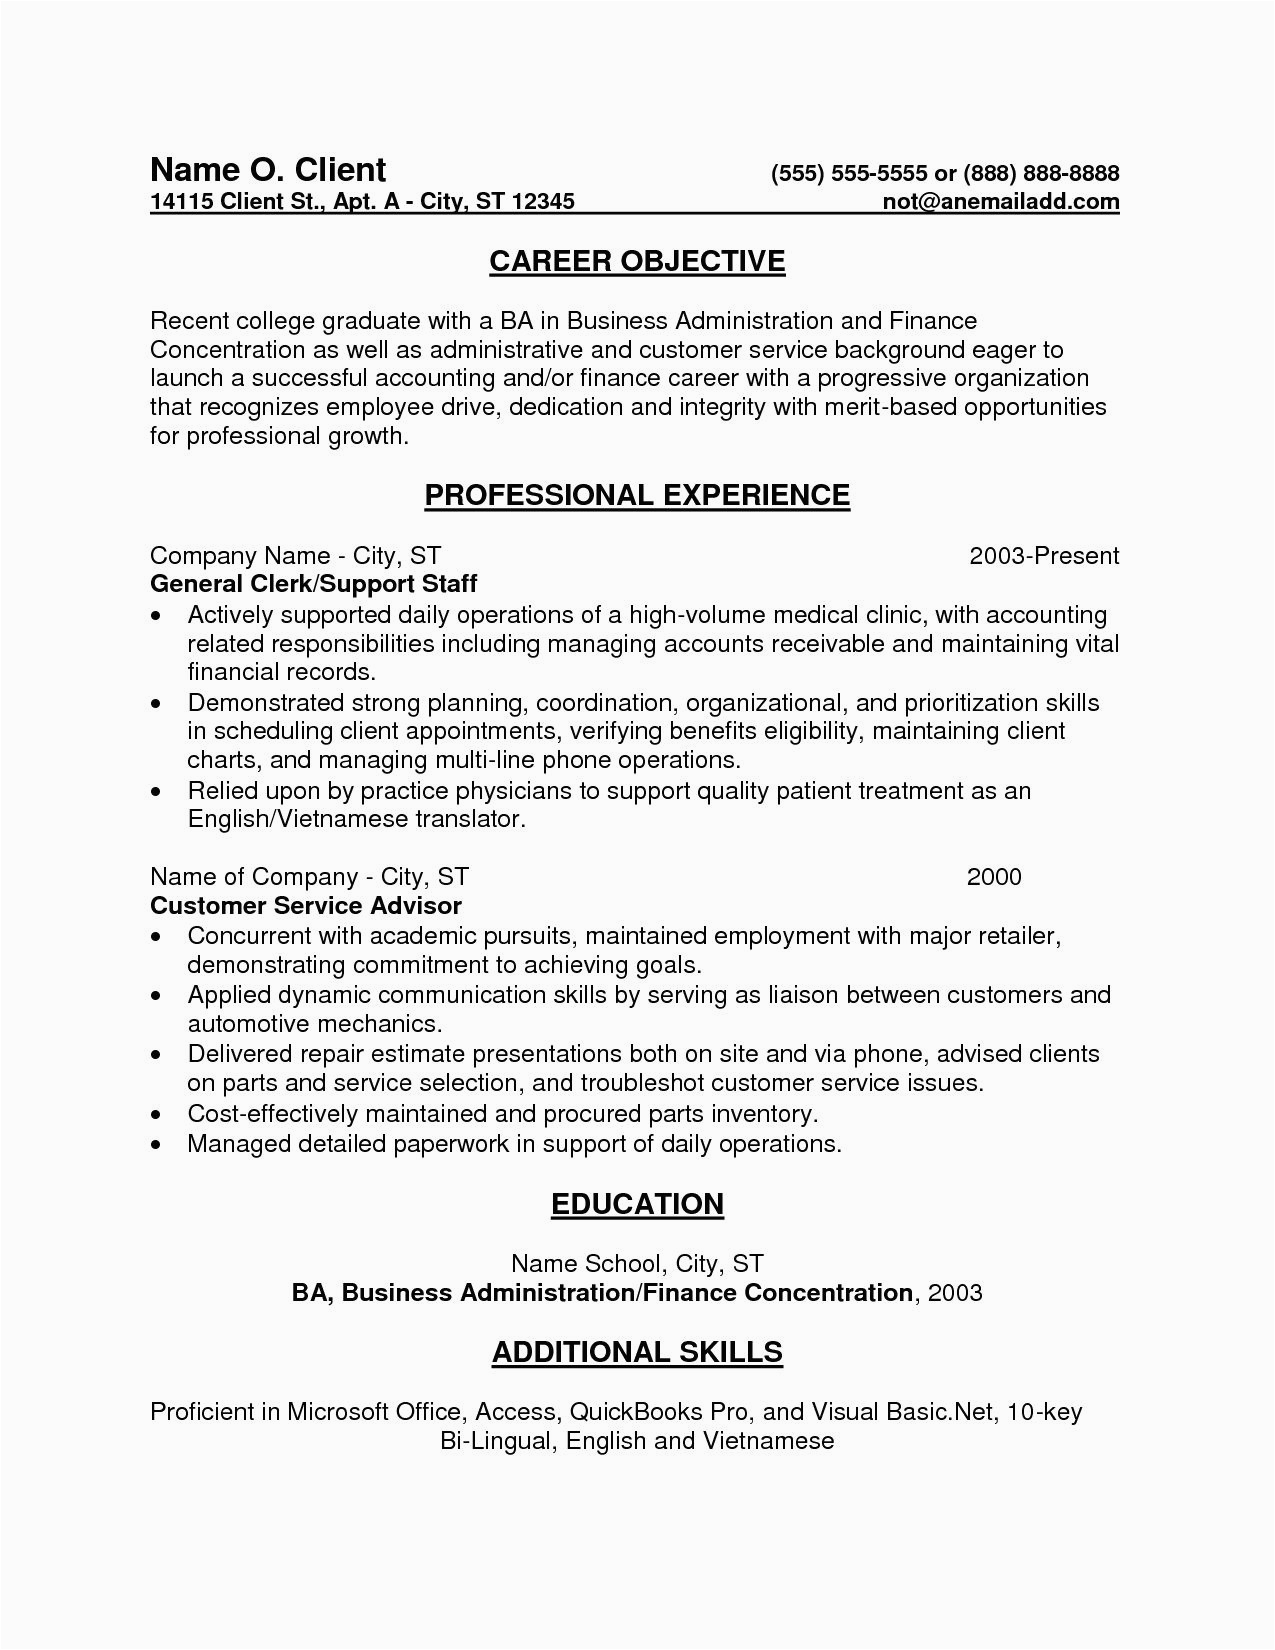 Sample Resume Objective Statements Entry Level Entry Level Accounting Cover Letter Lovely Resume